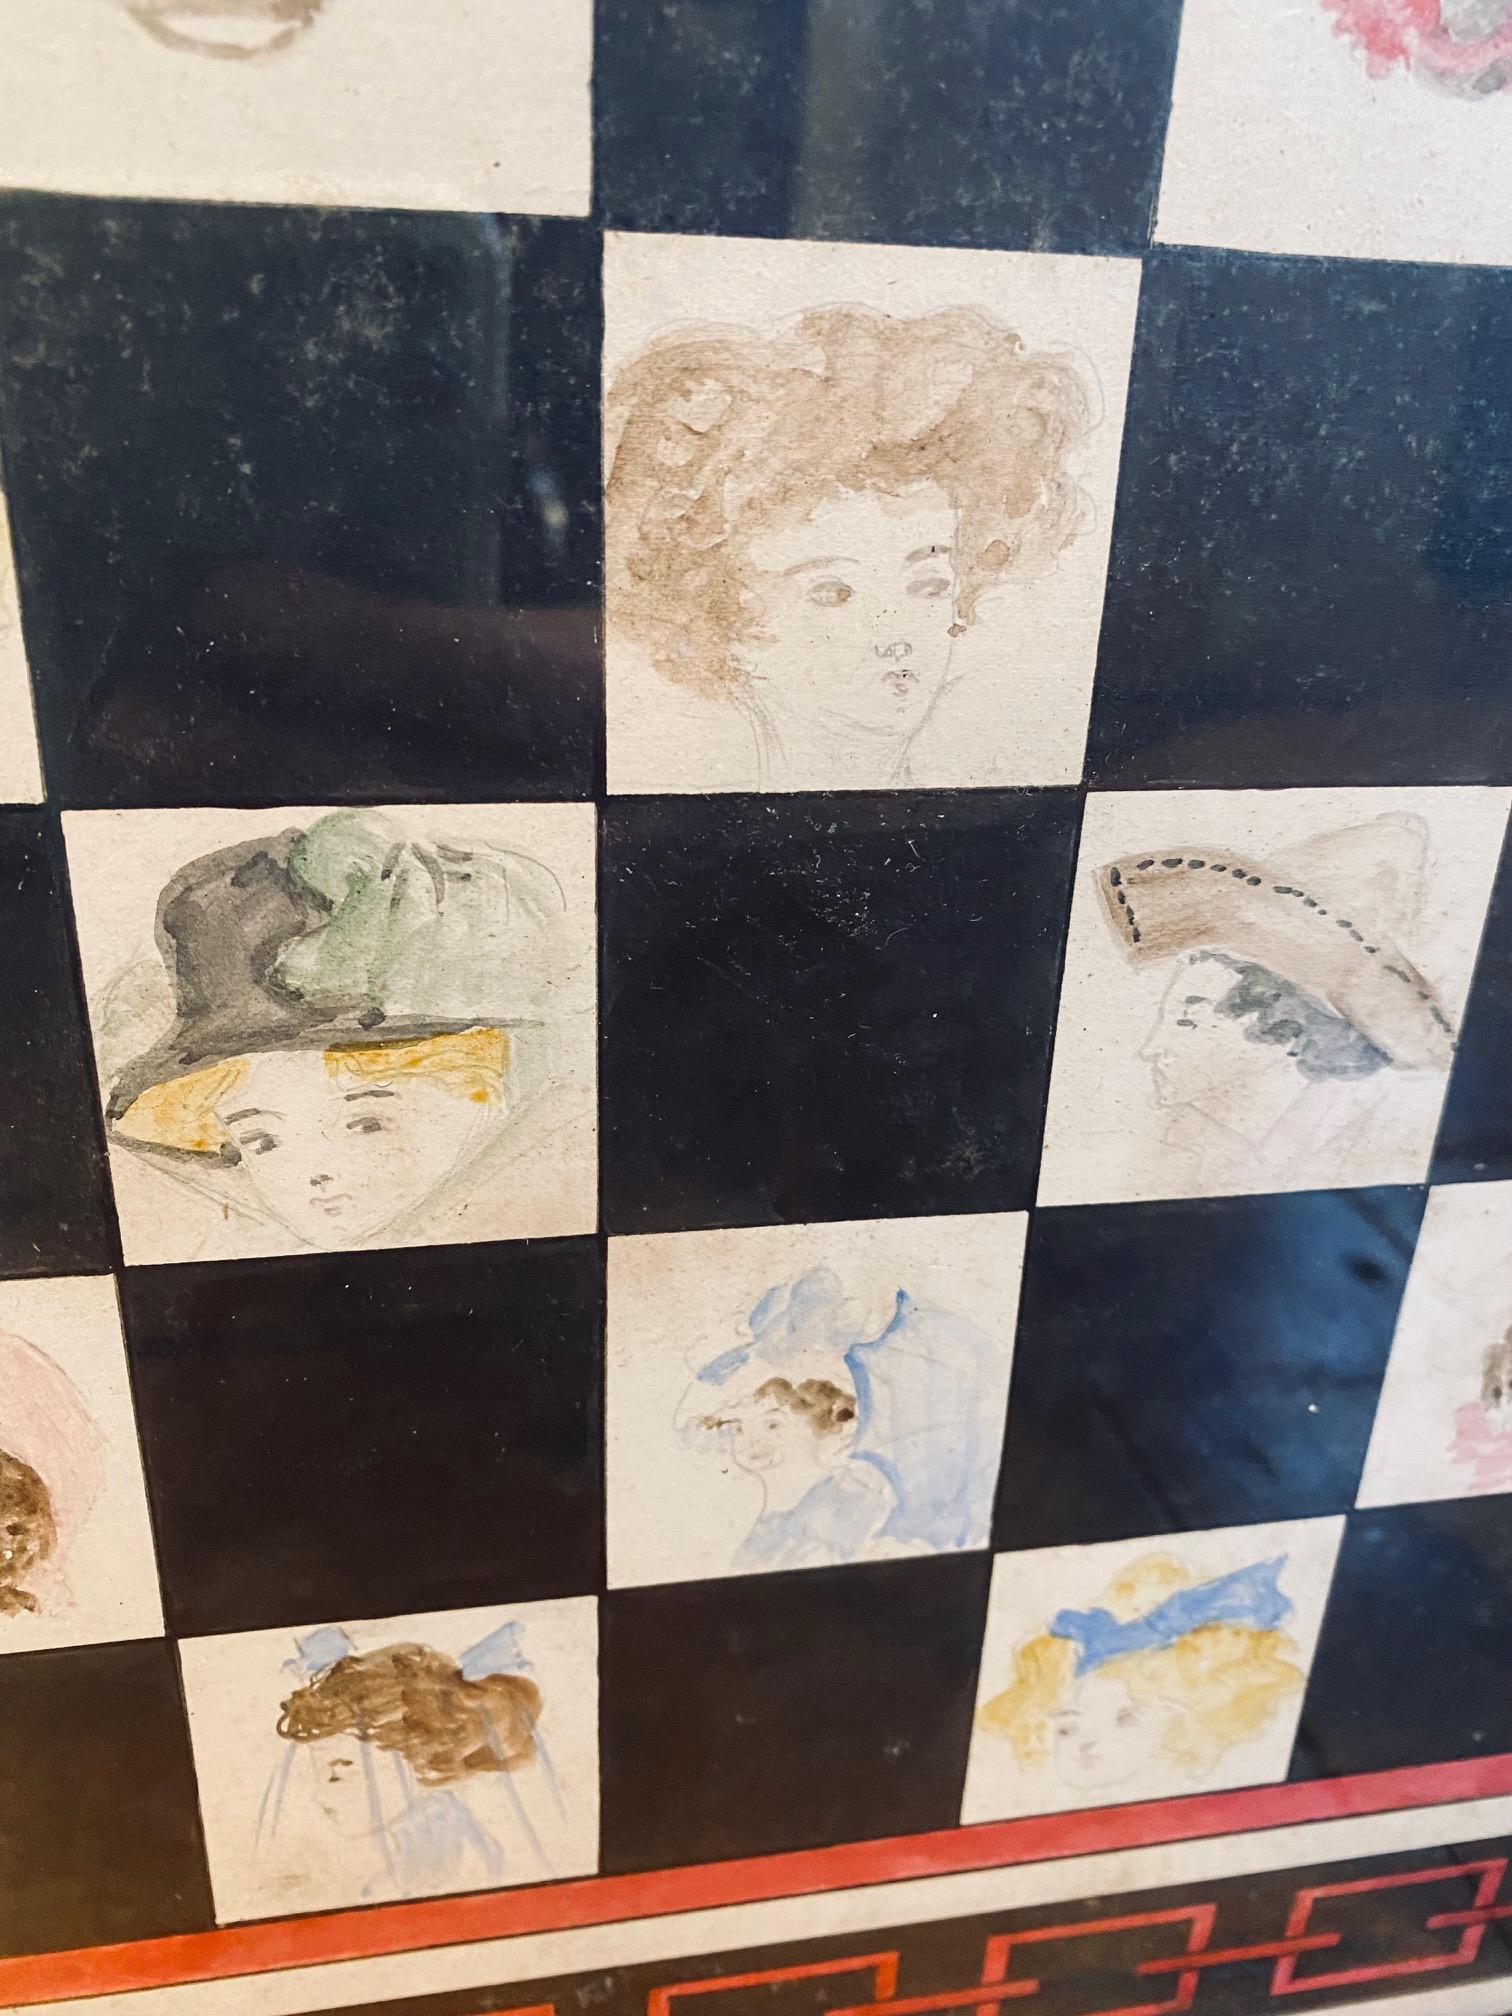 Late 19th century hand made and decoratively painted game board, circa 1890s to 1910, a checker or chess board with squares individually hand painted with miniature watercolor portraits of different stylish young women... Late Victorian precursors